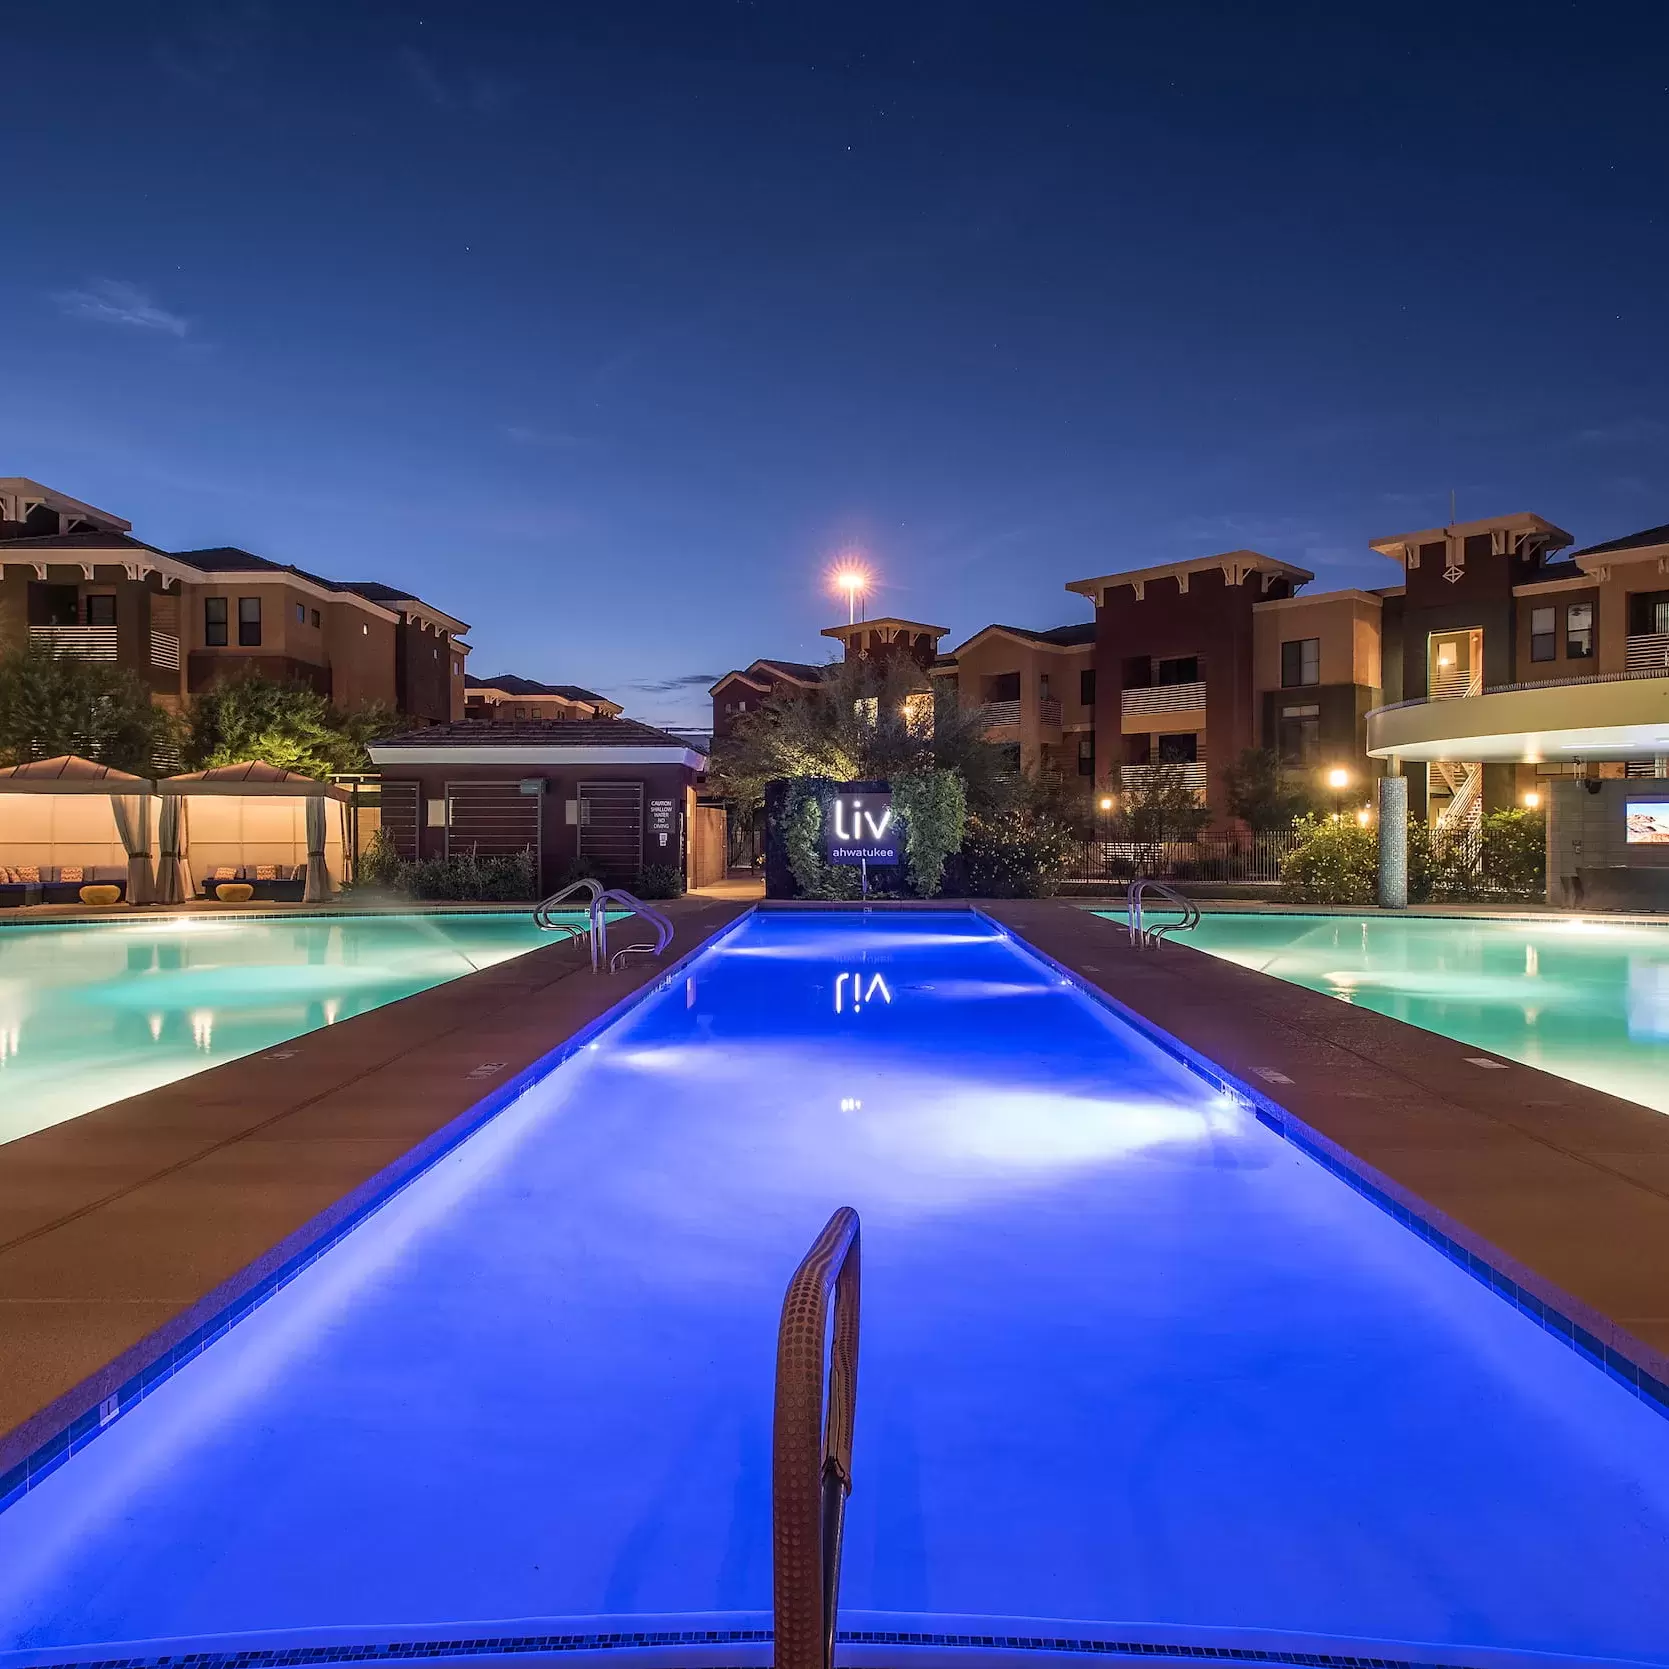 The pools lit up at night under a clear sky at Liv Ahwatukee.